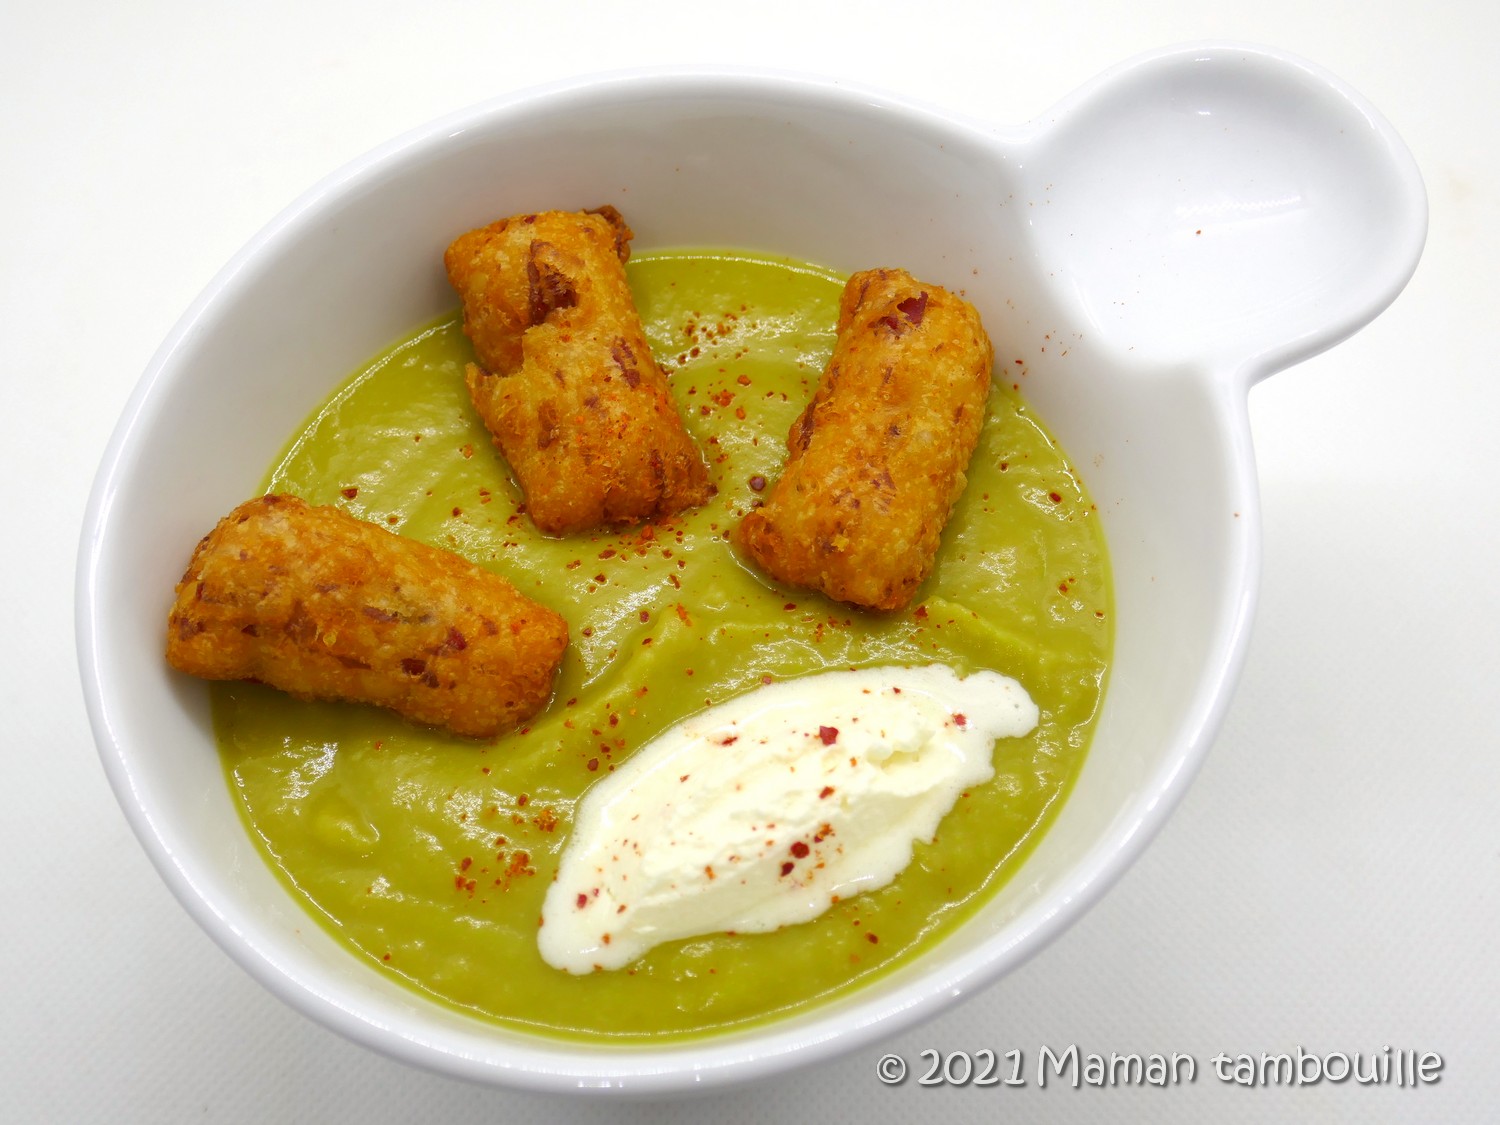 You are currently viewing Potage Saint Germain, beignets Pignatelli